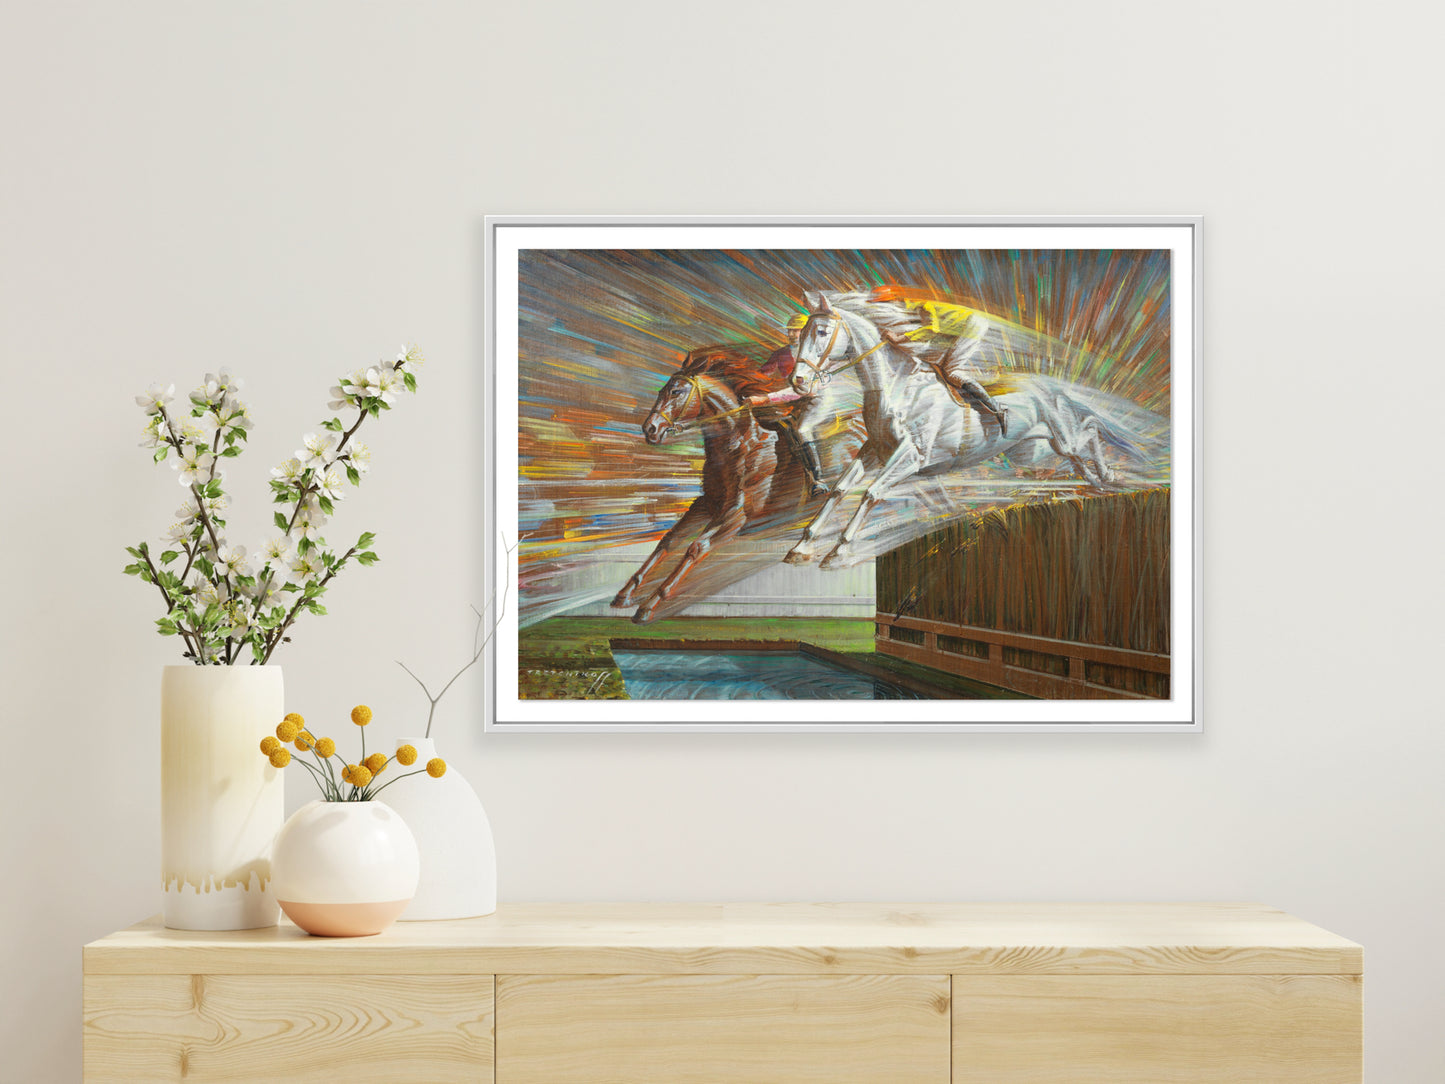 Grand National / Over the Jumps - Tretchikoff Print